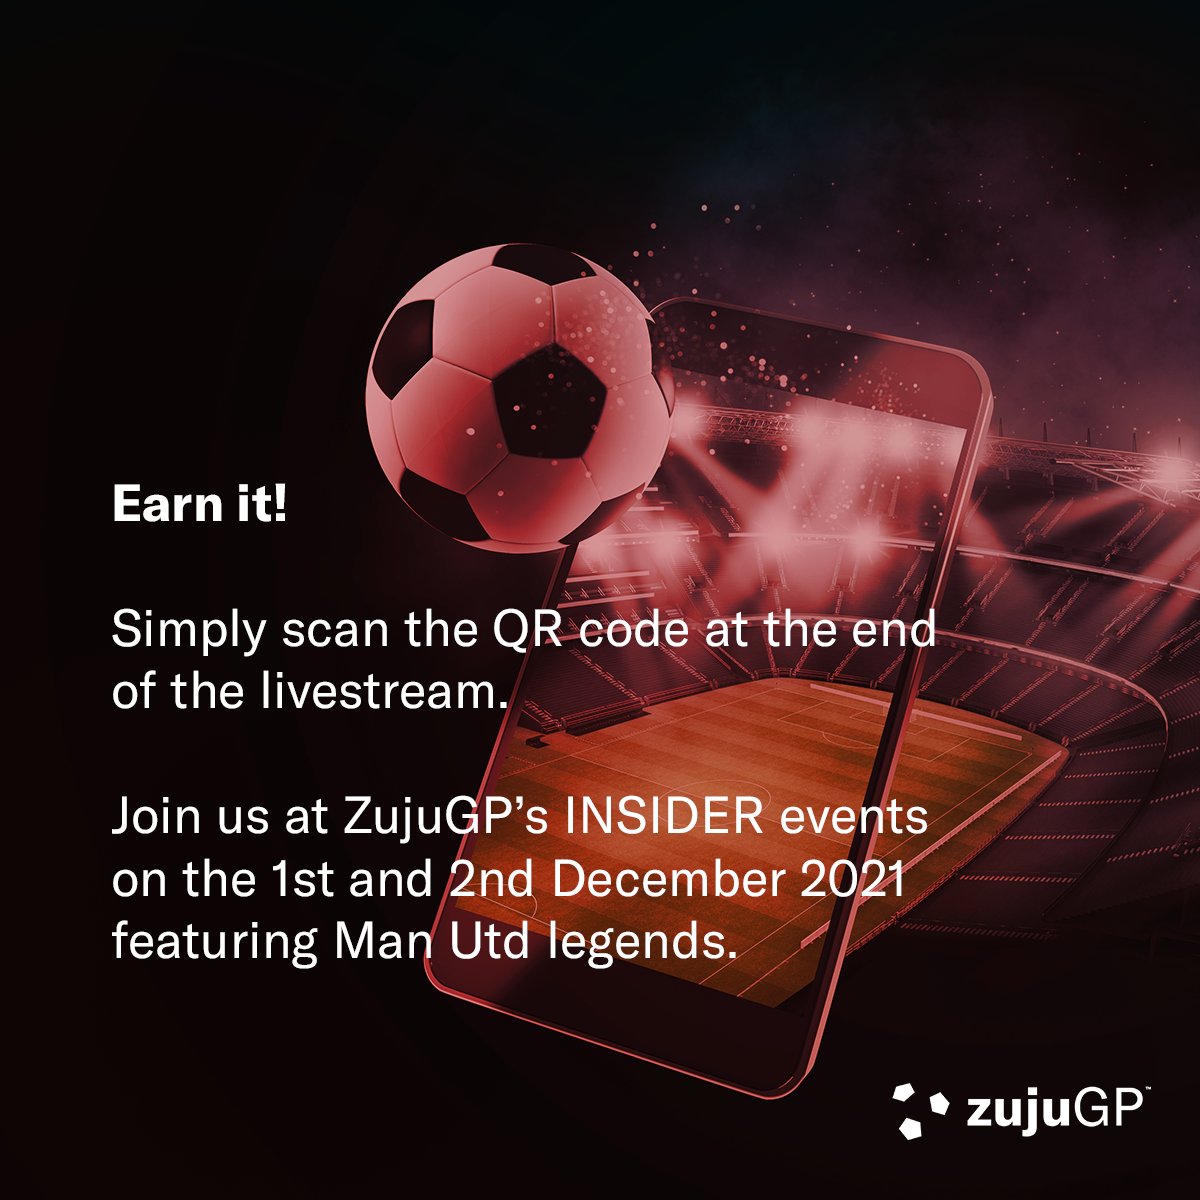 Join ZujuGP's Facebook LIVE events featuring Man Utd legends on 1 and 2 Dec at 5.30pm (UTC+8). Claim exclusive event POAPs - only 1000 will be issued - during each livestream! 